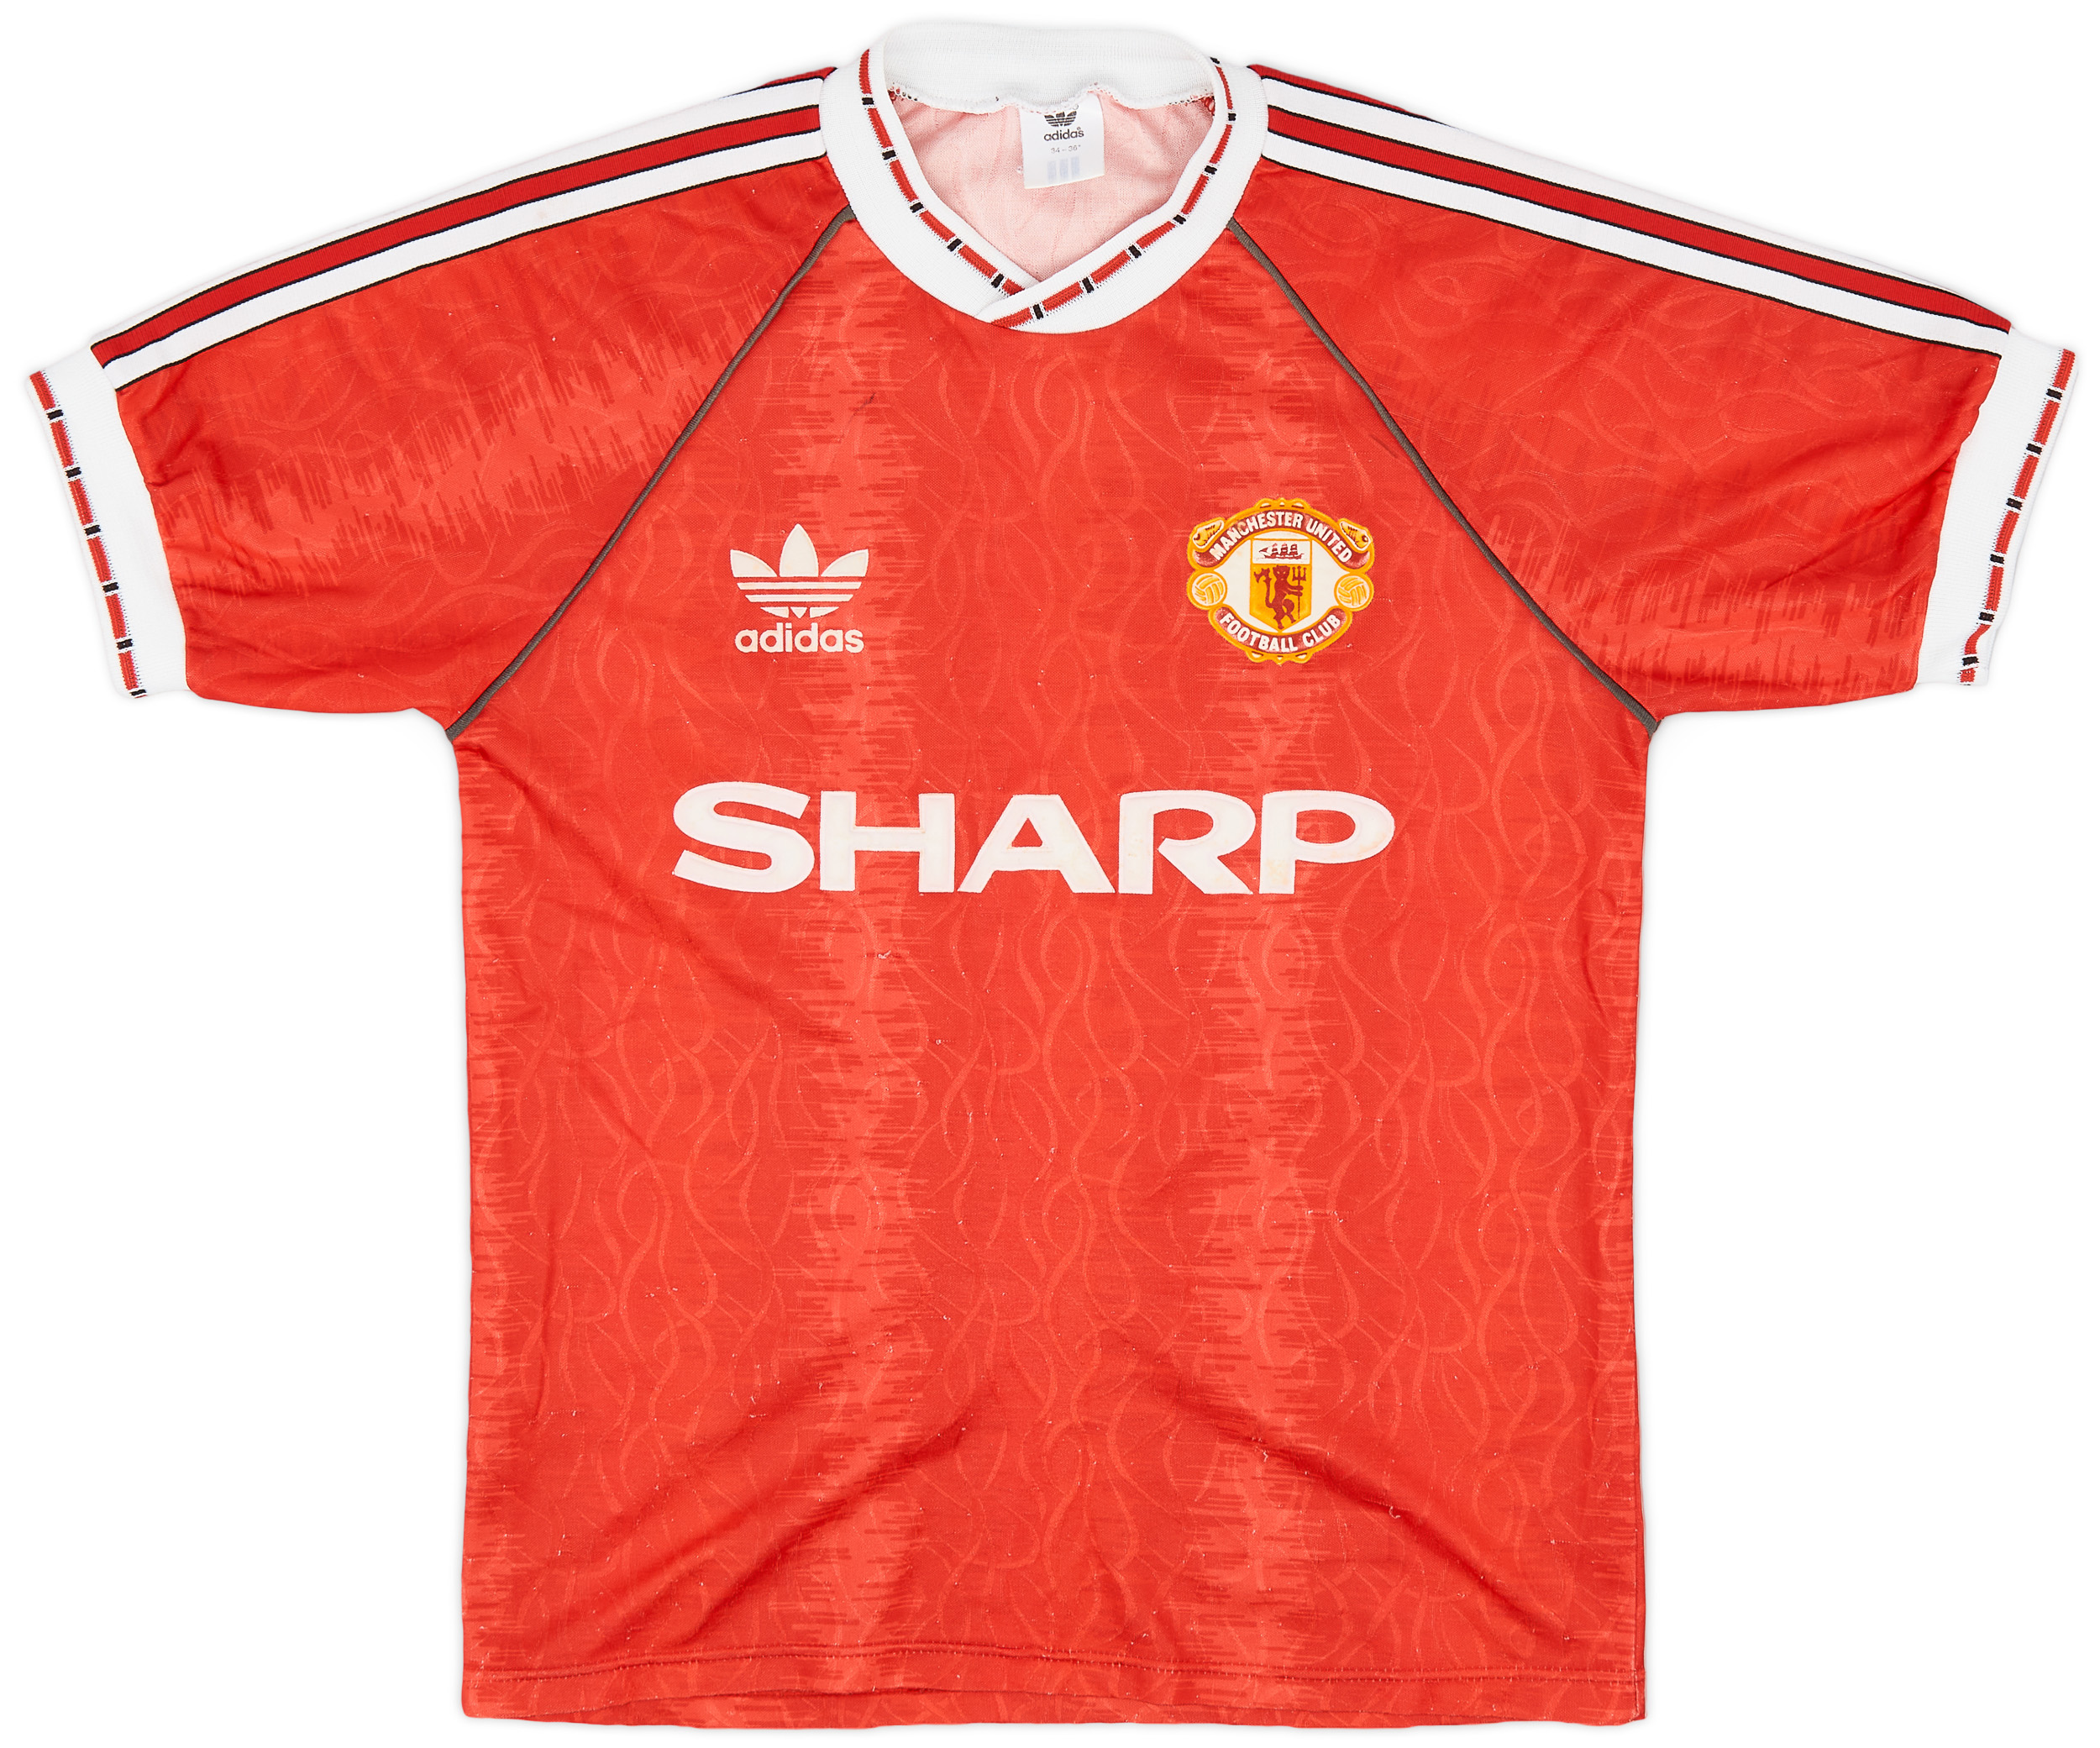 1990-92 Manchester United Home Shirt - 9/10 - ()